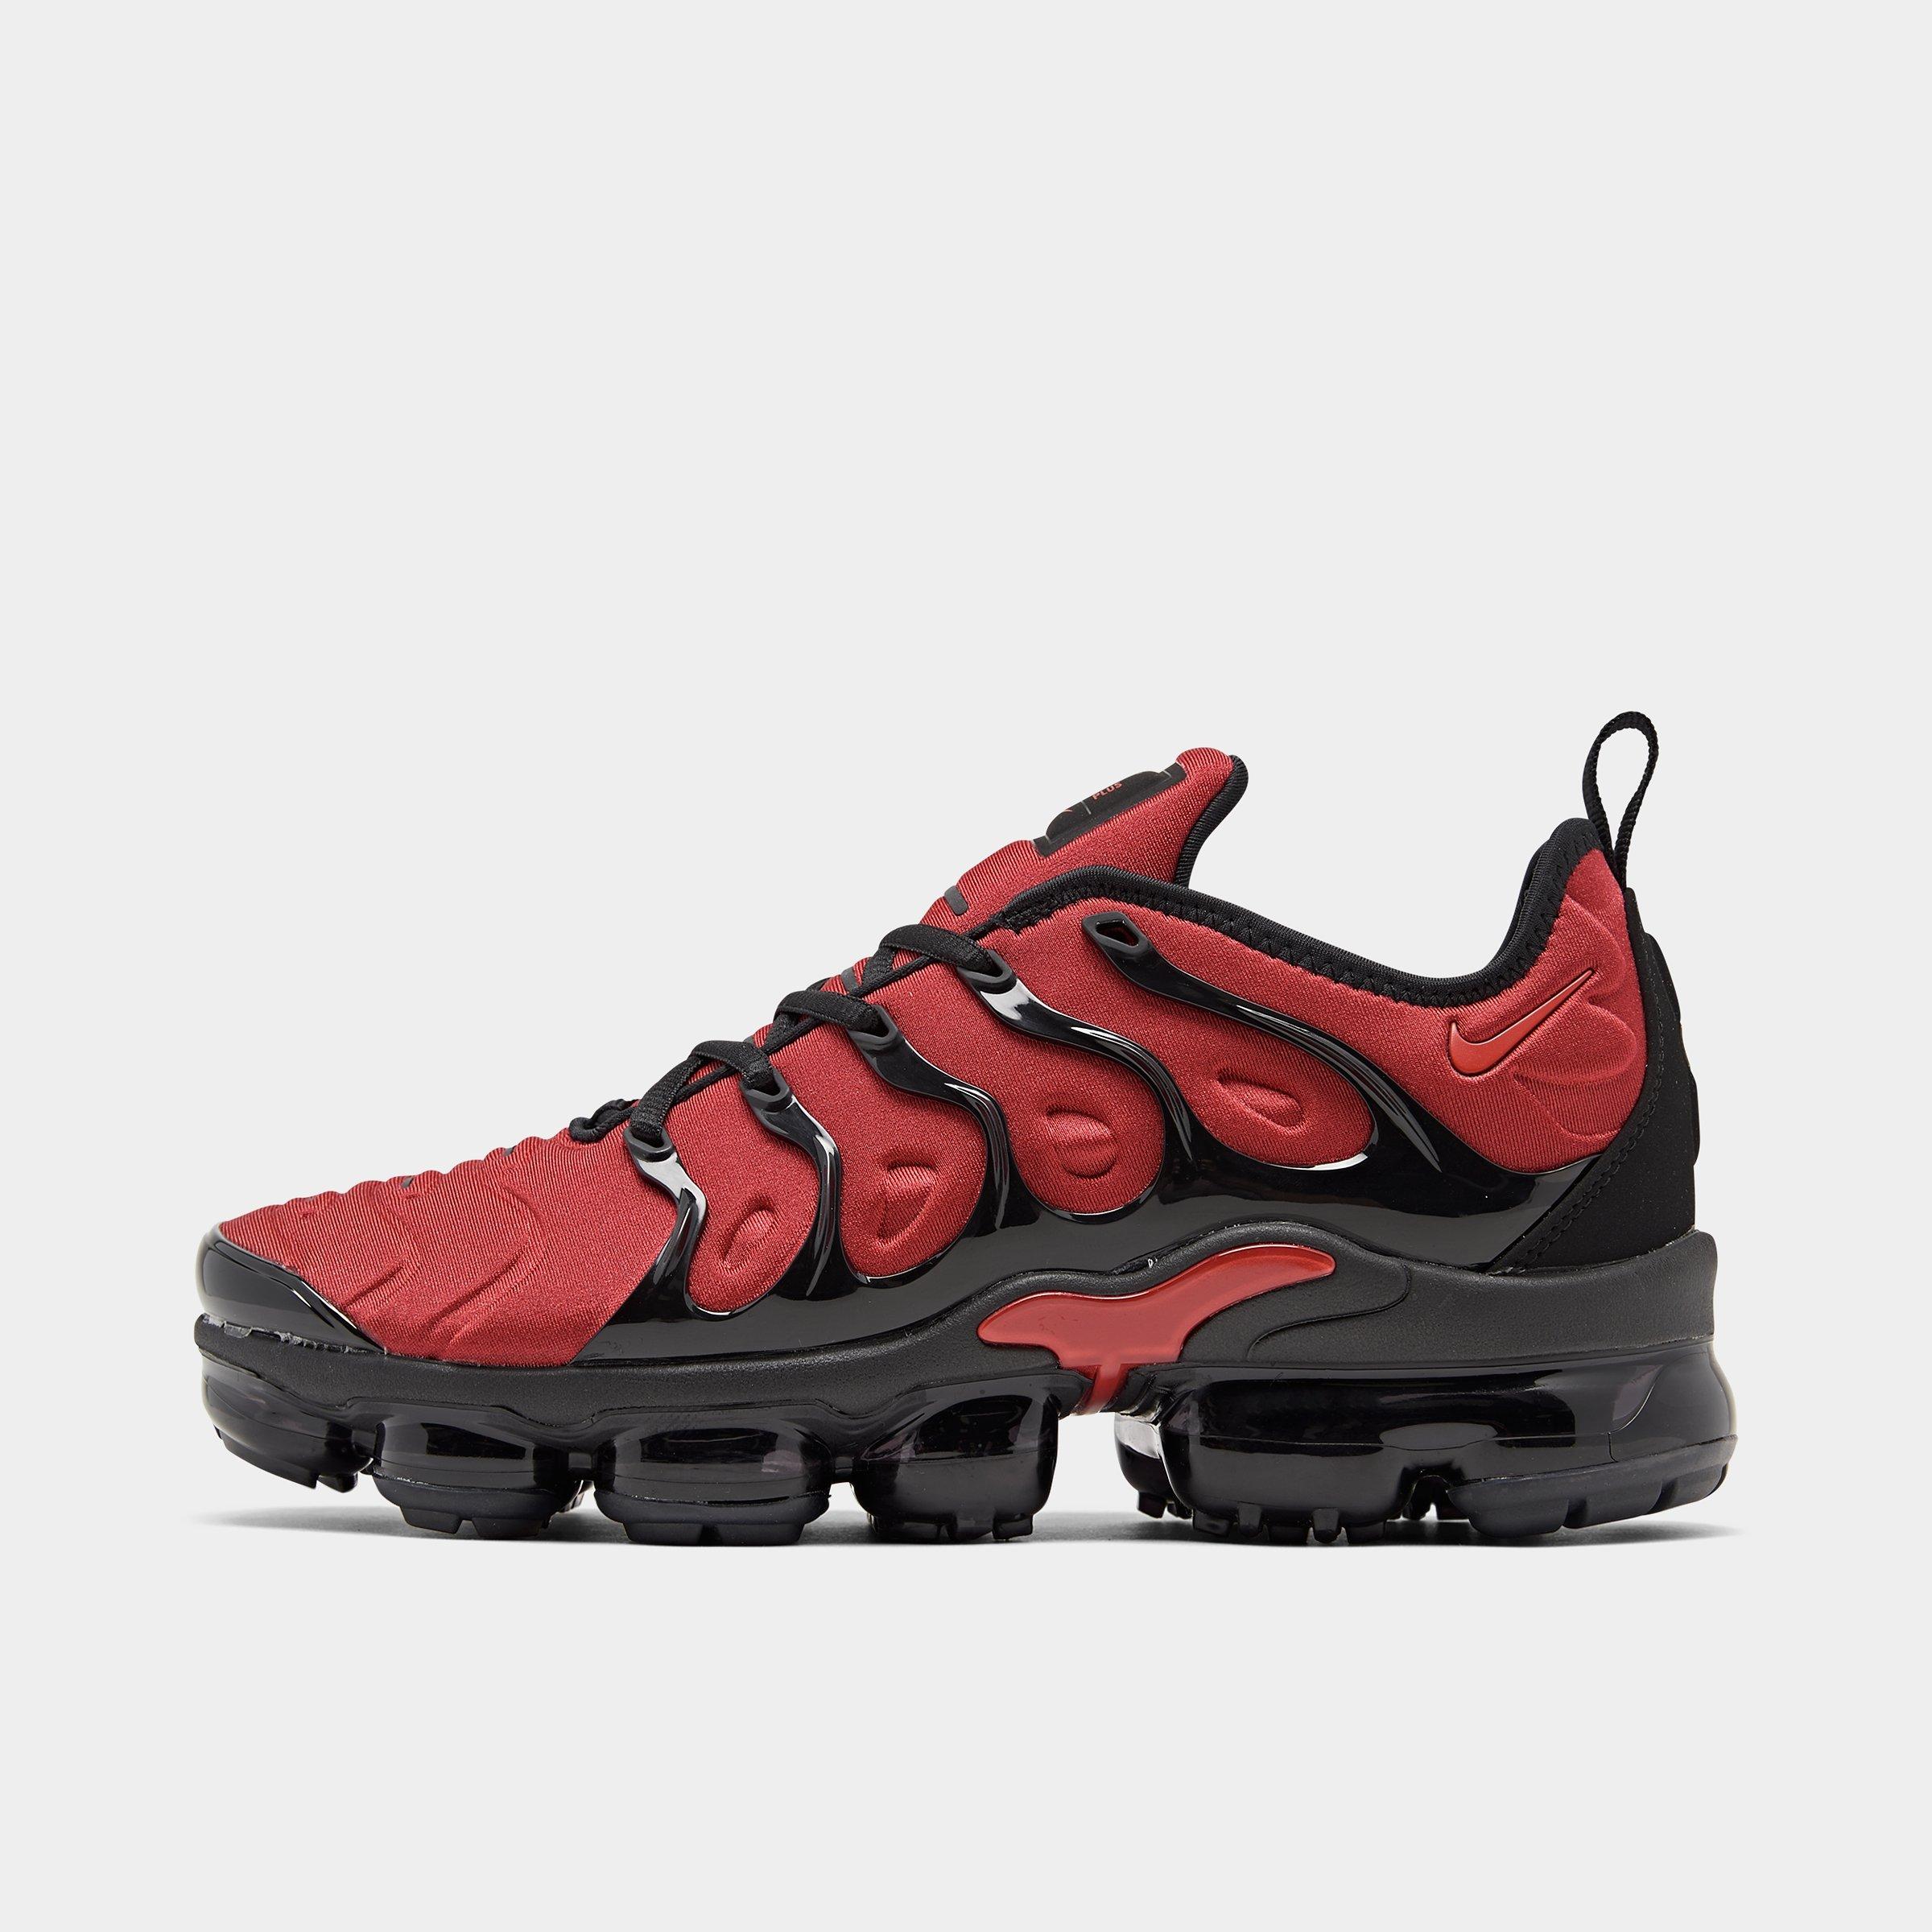 vapormax university red and black